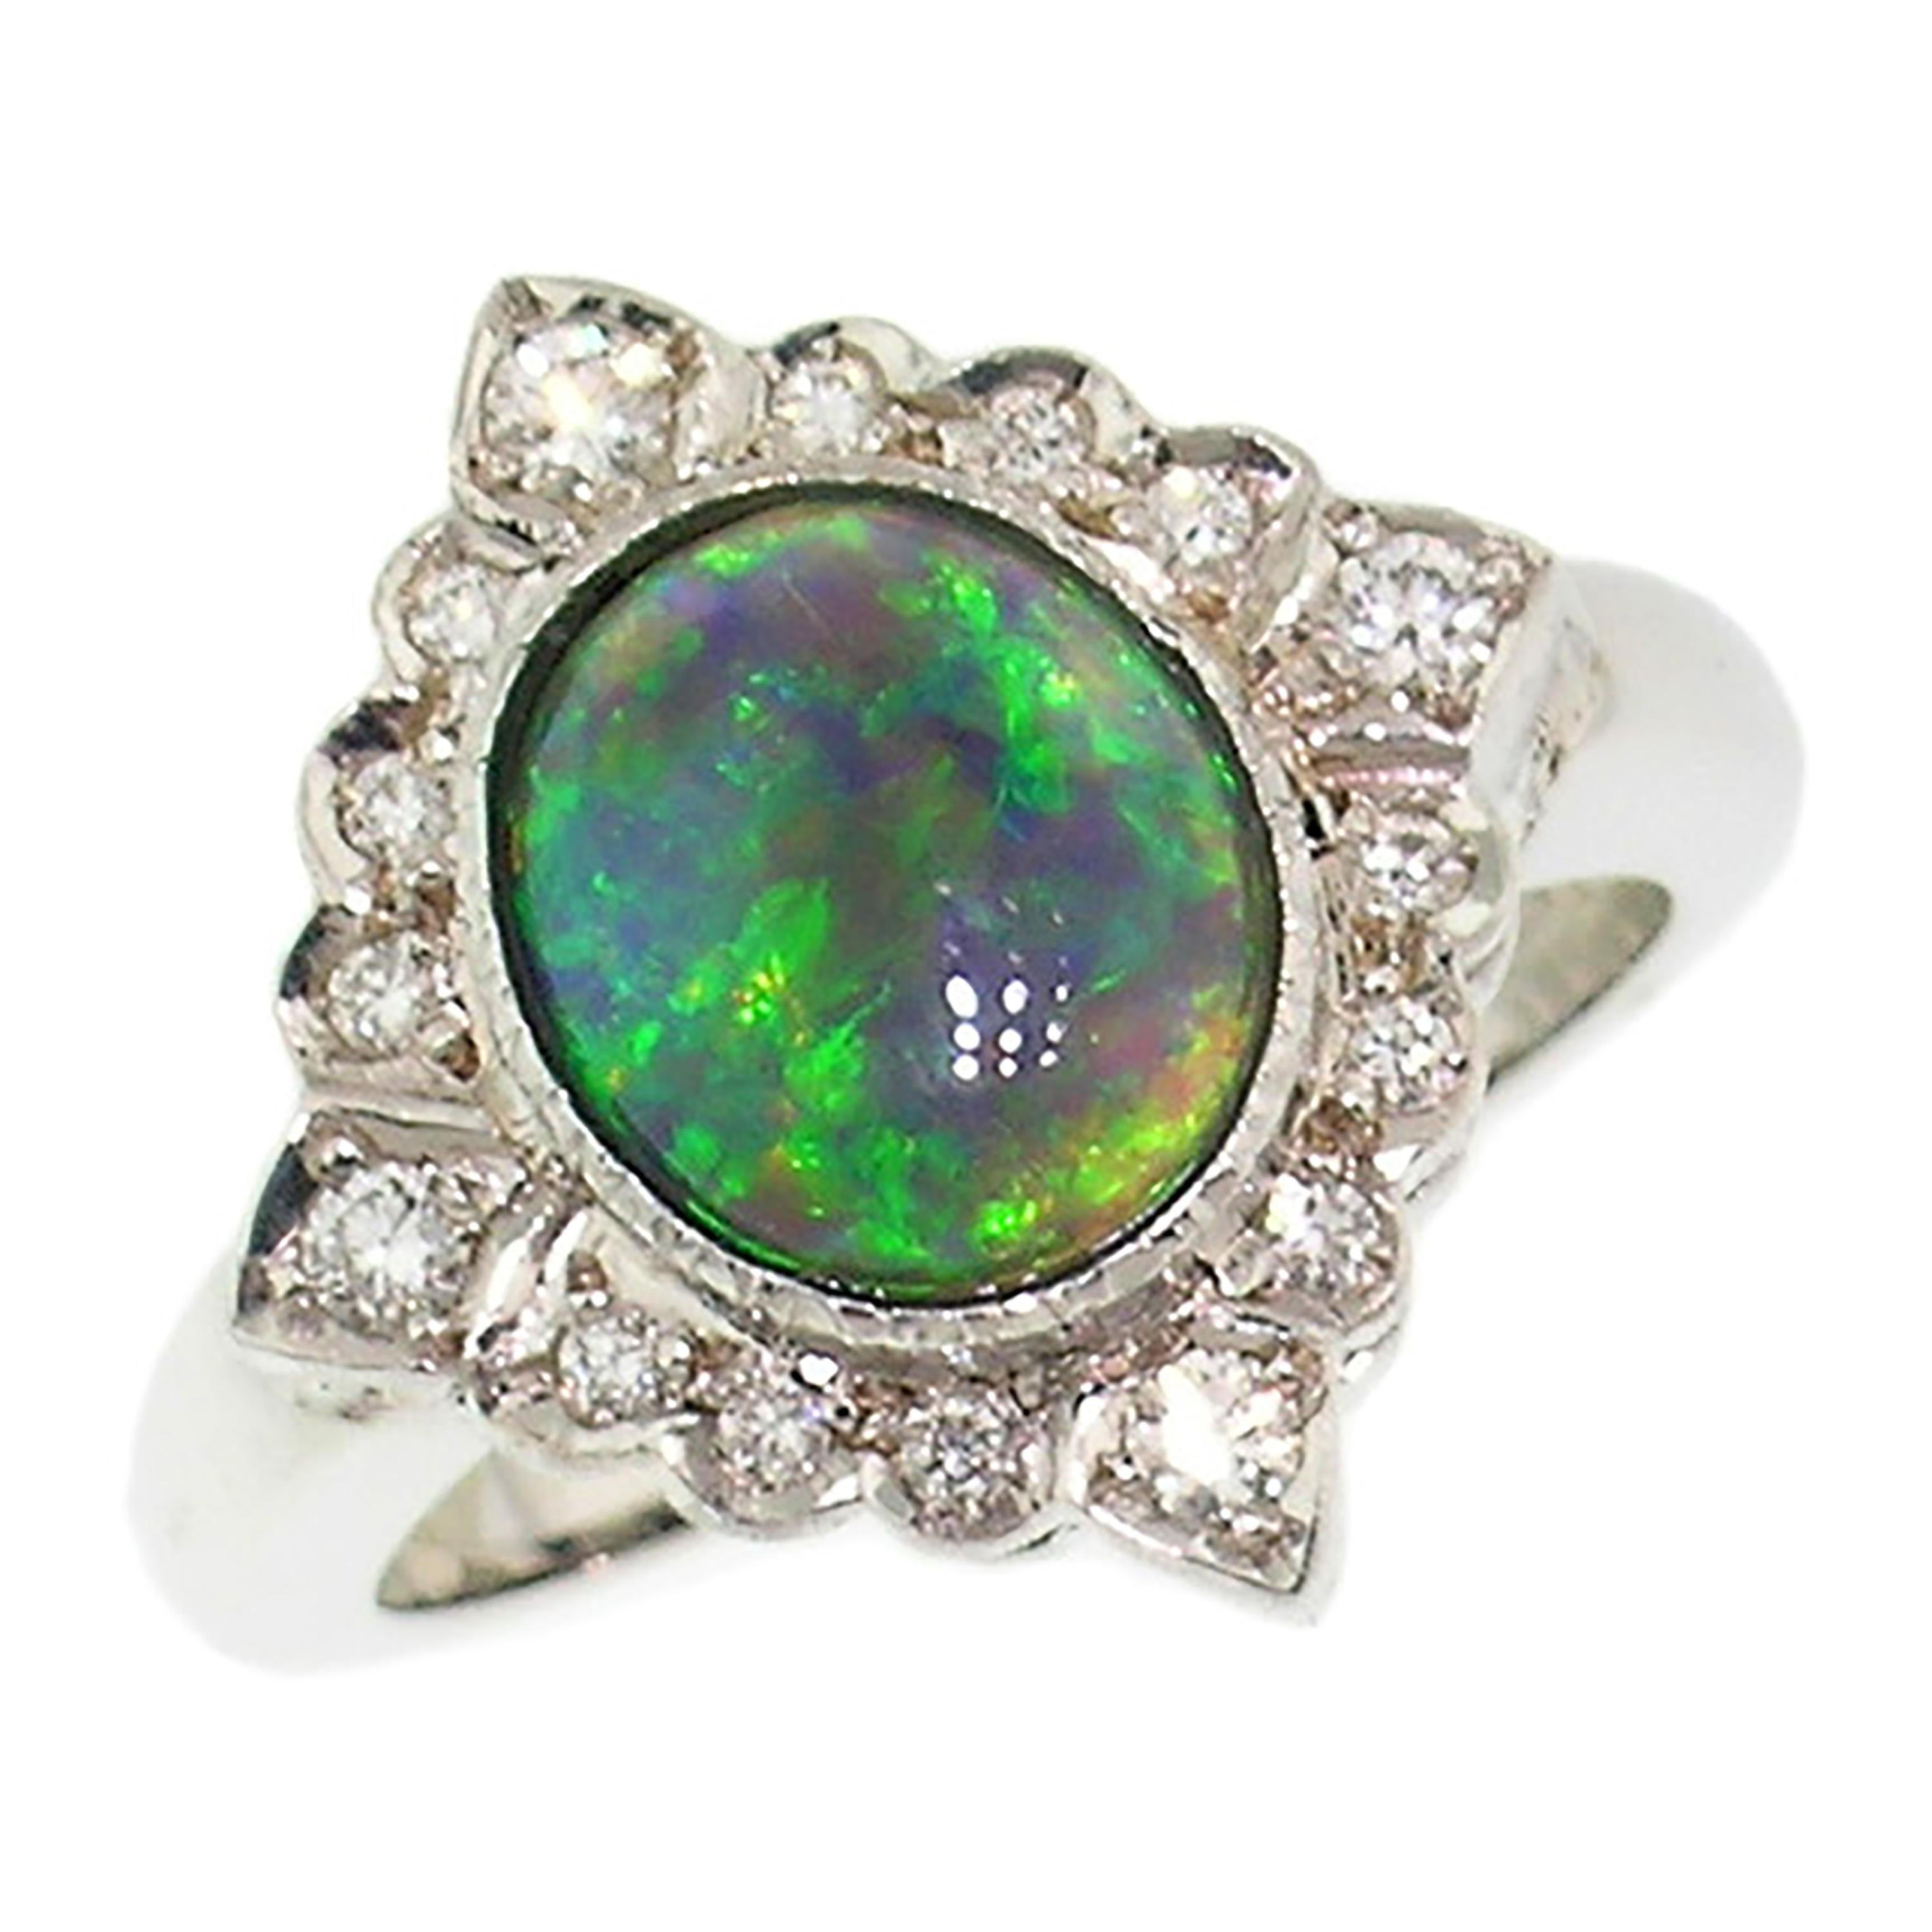 Cynthia Scott 2.60ct Black Opal in 18kt Ring, Made in Italy